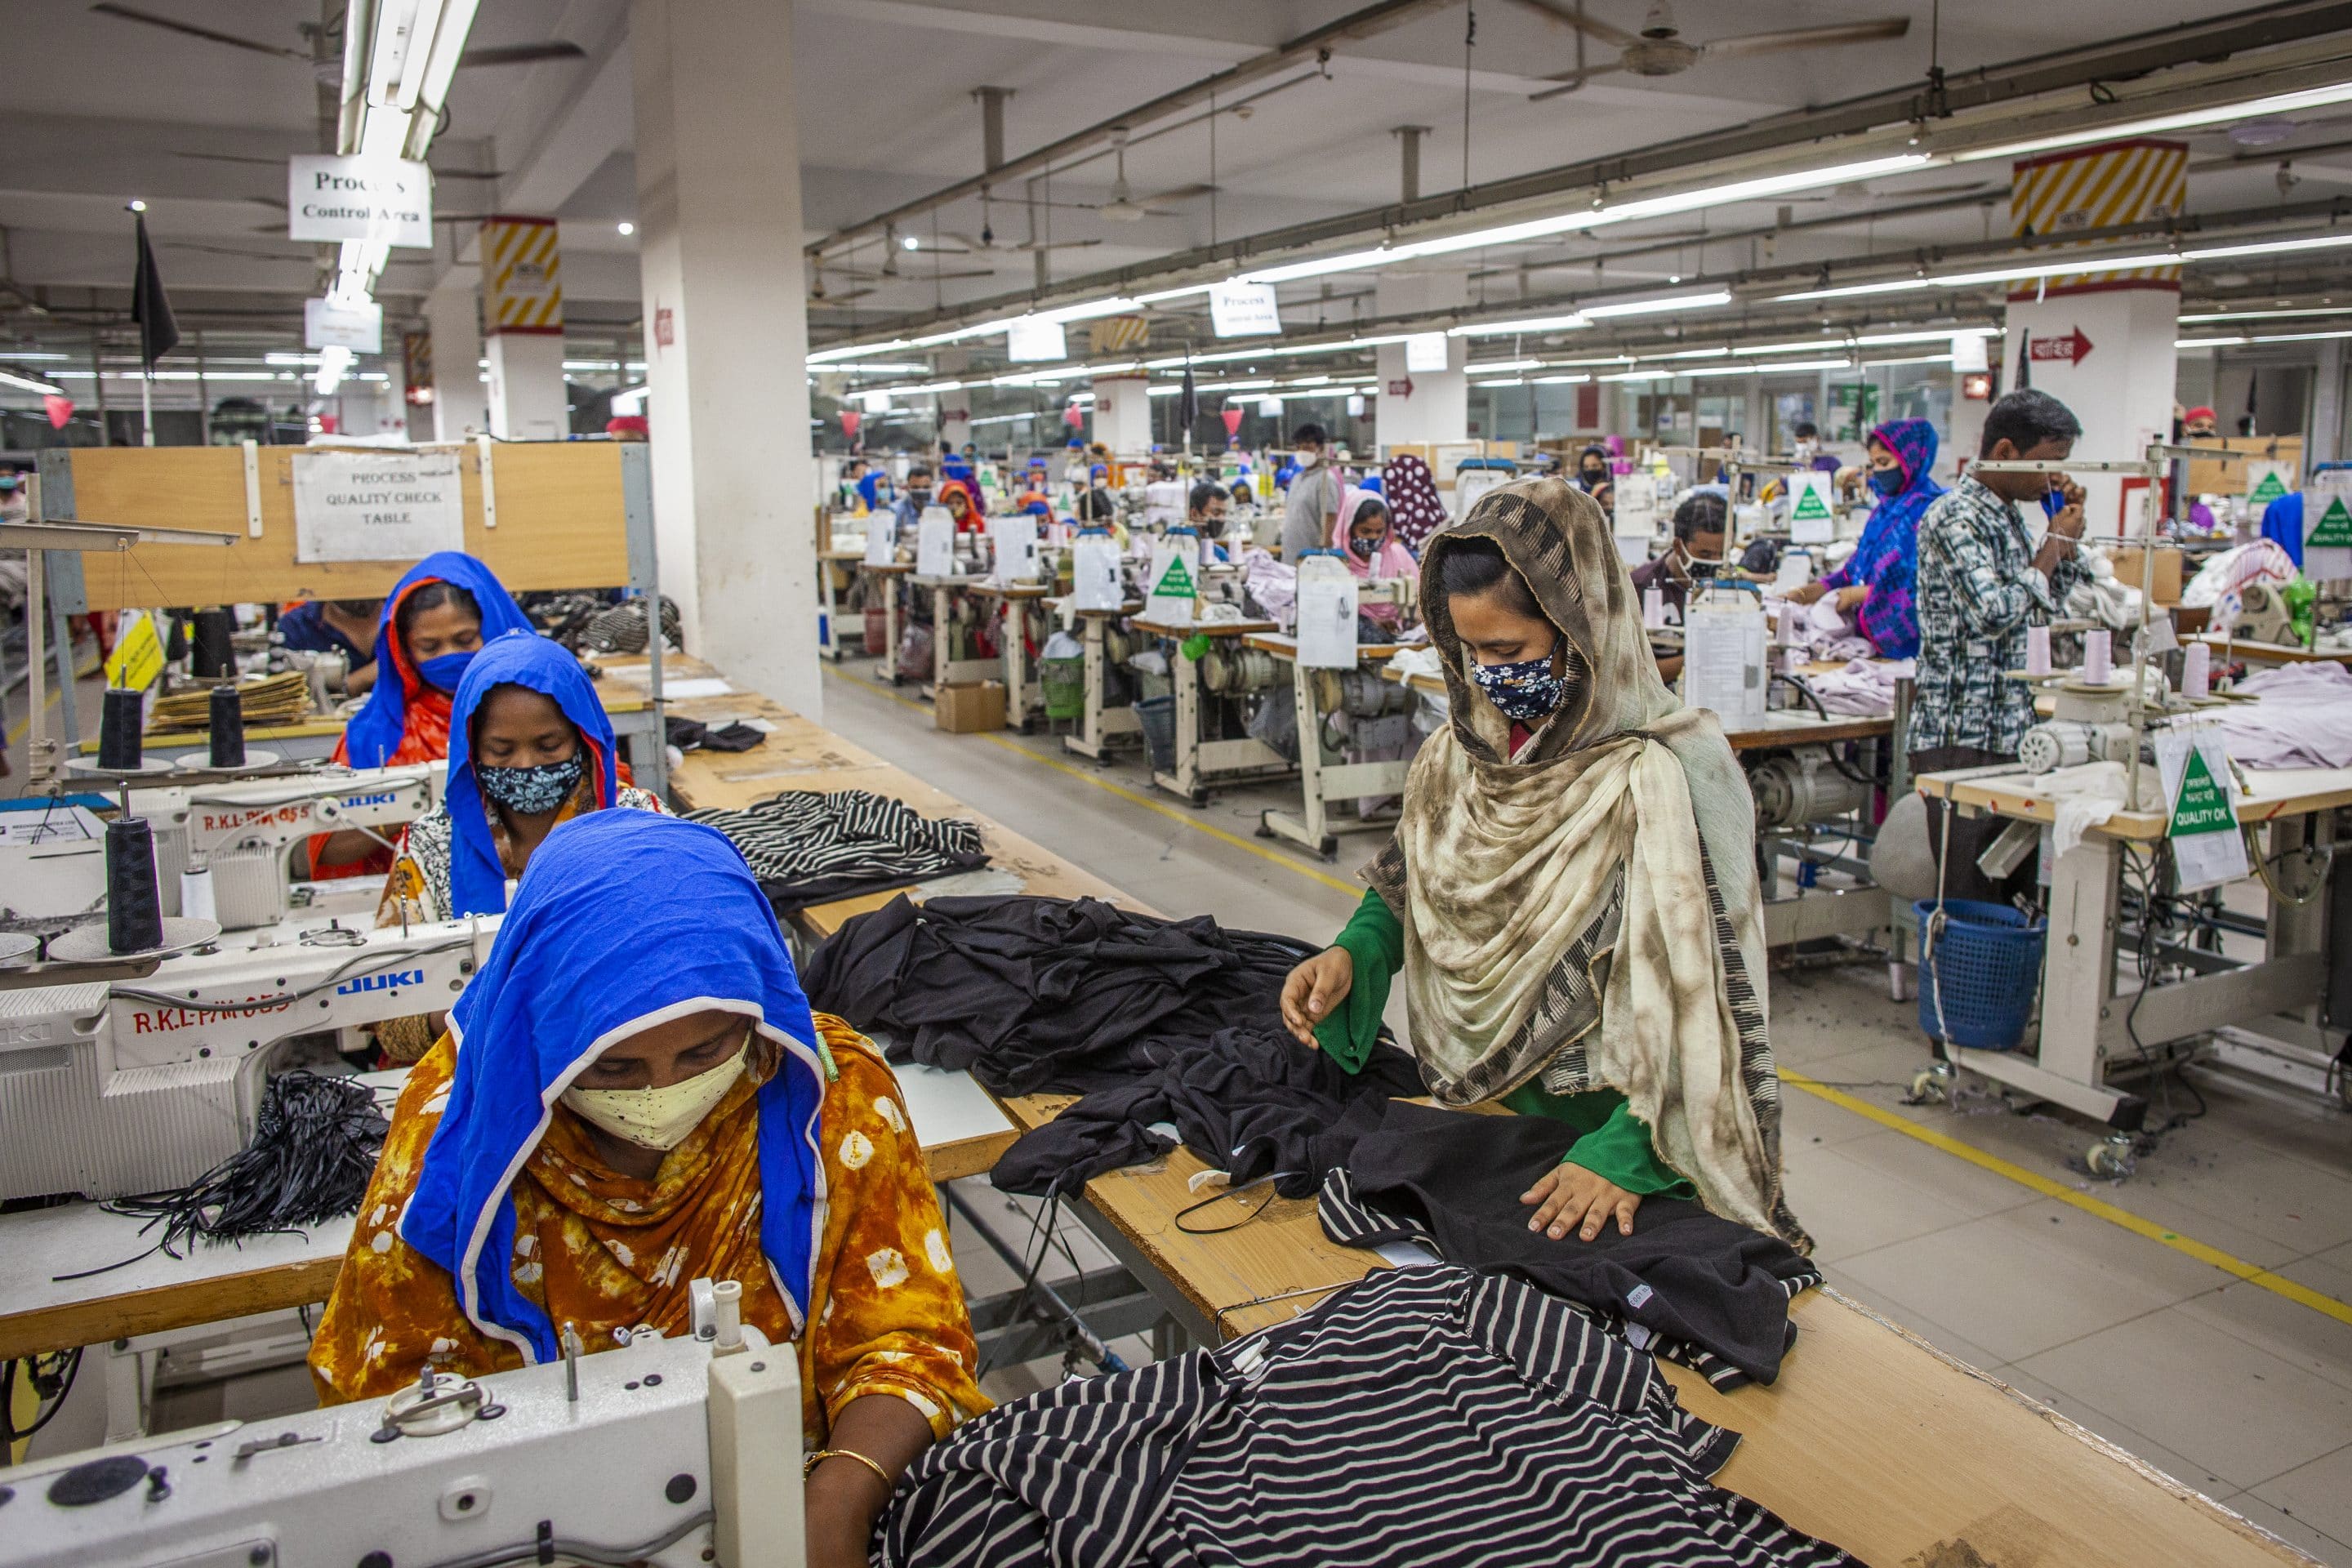 Women work at sewing machines and assemble clothing pieces